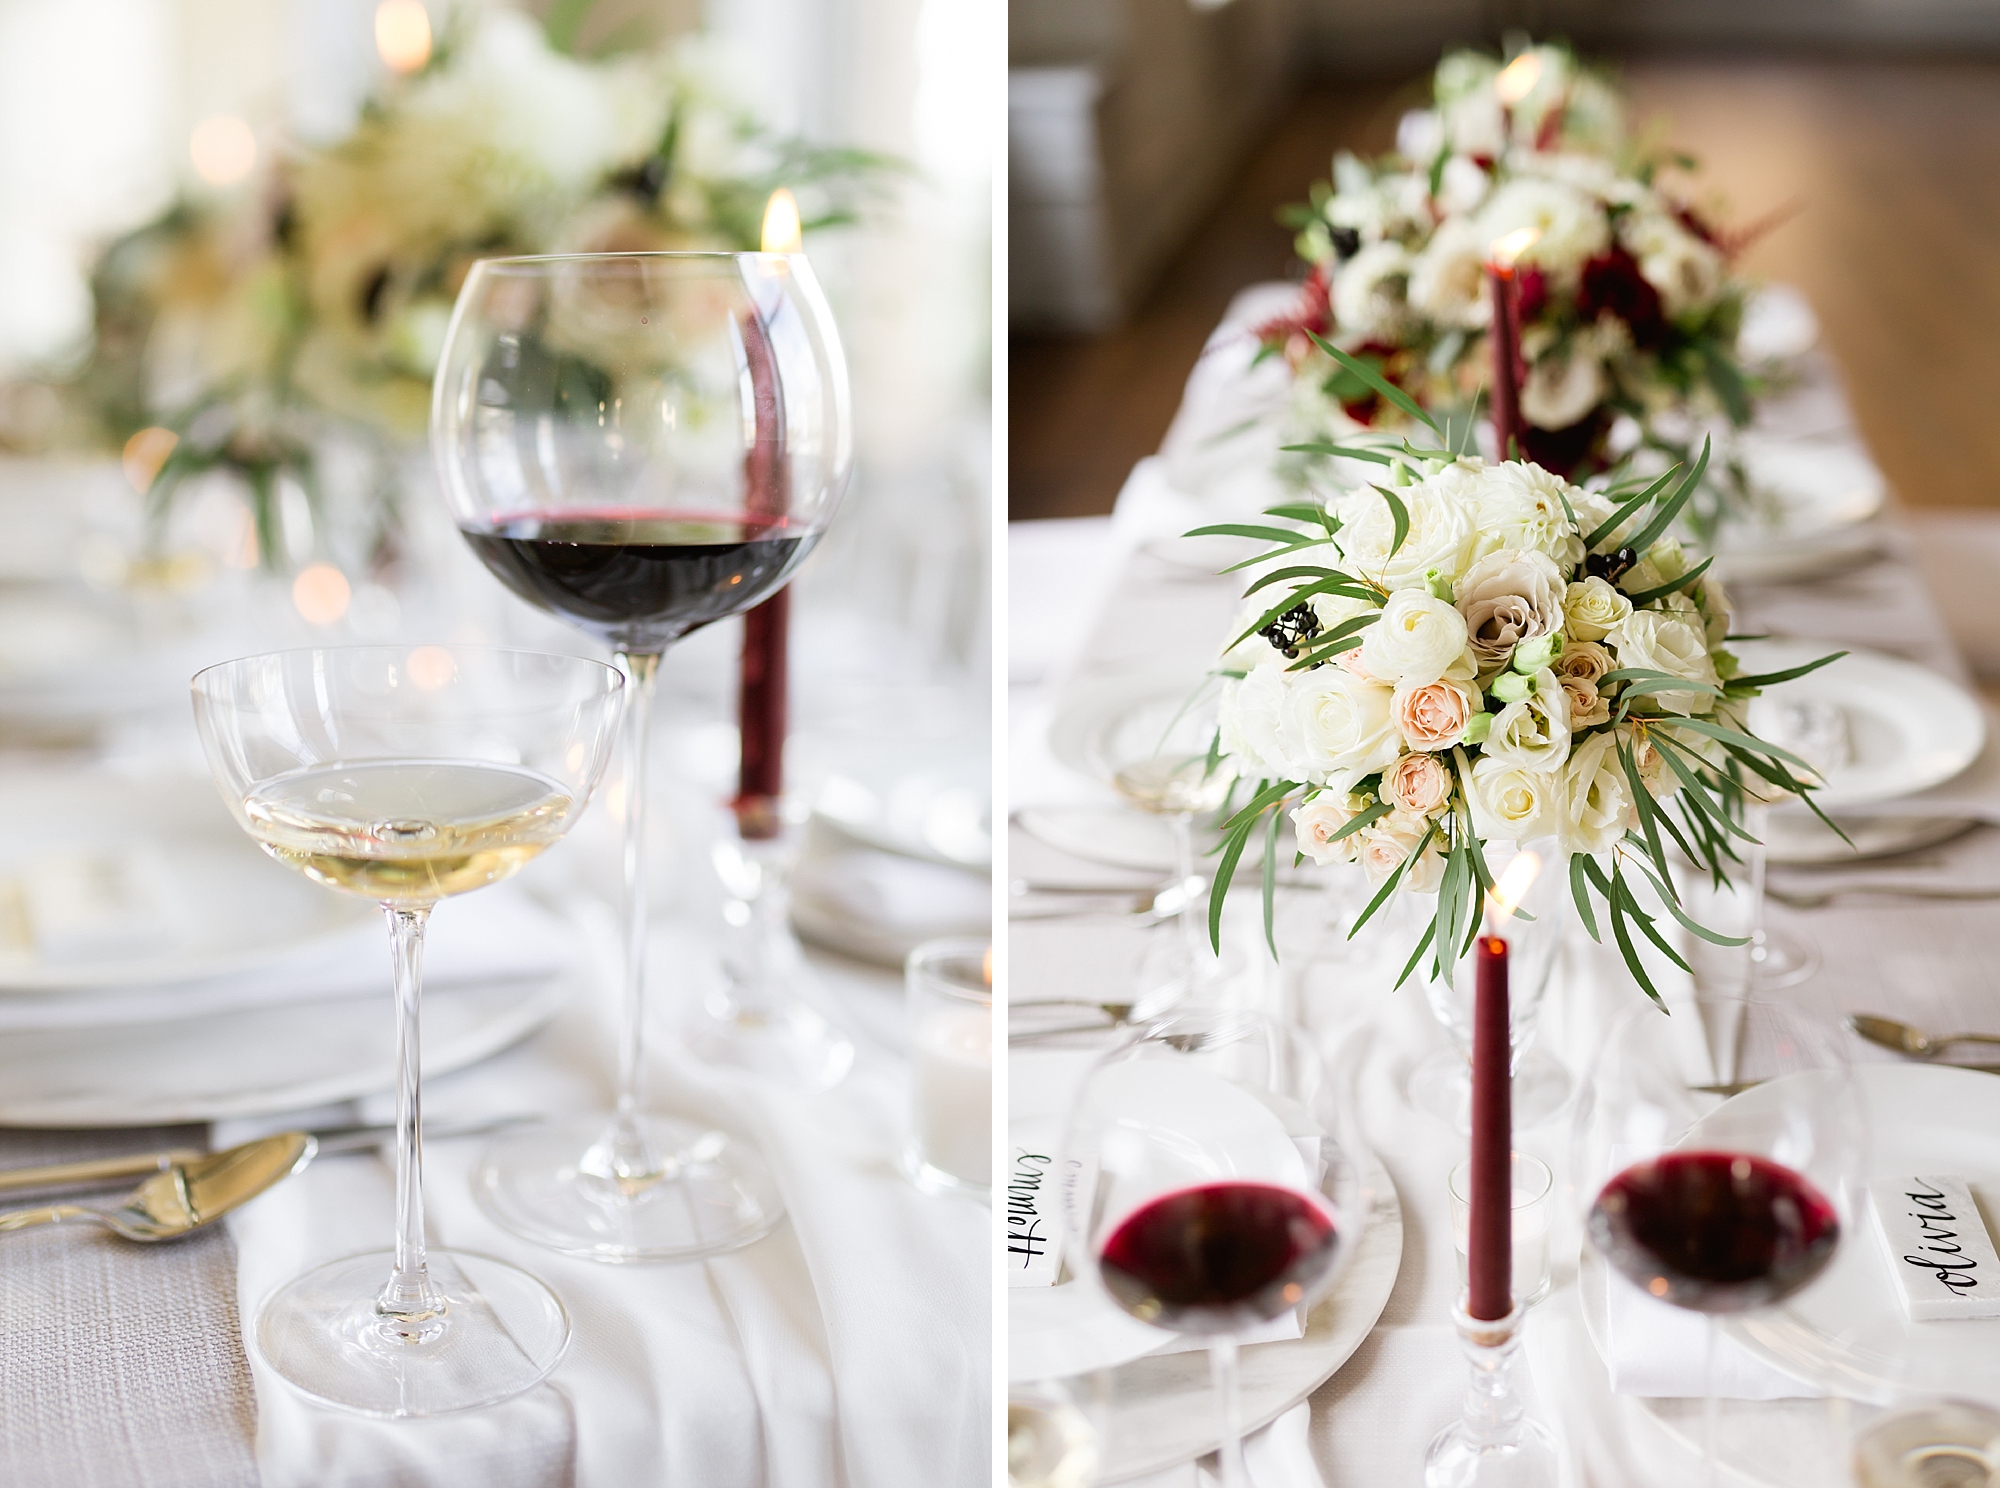 An elegant black tie inspired wedding filled with burgundy florals and modern marble details at Castle Hall in Downtown Detroit, Michigan by Breanne Rochelle Photography.